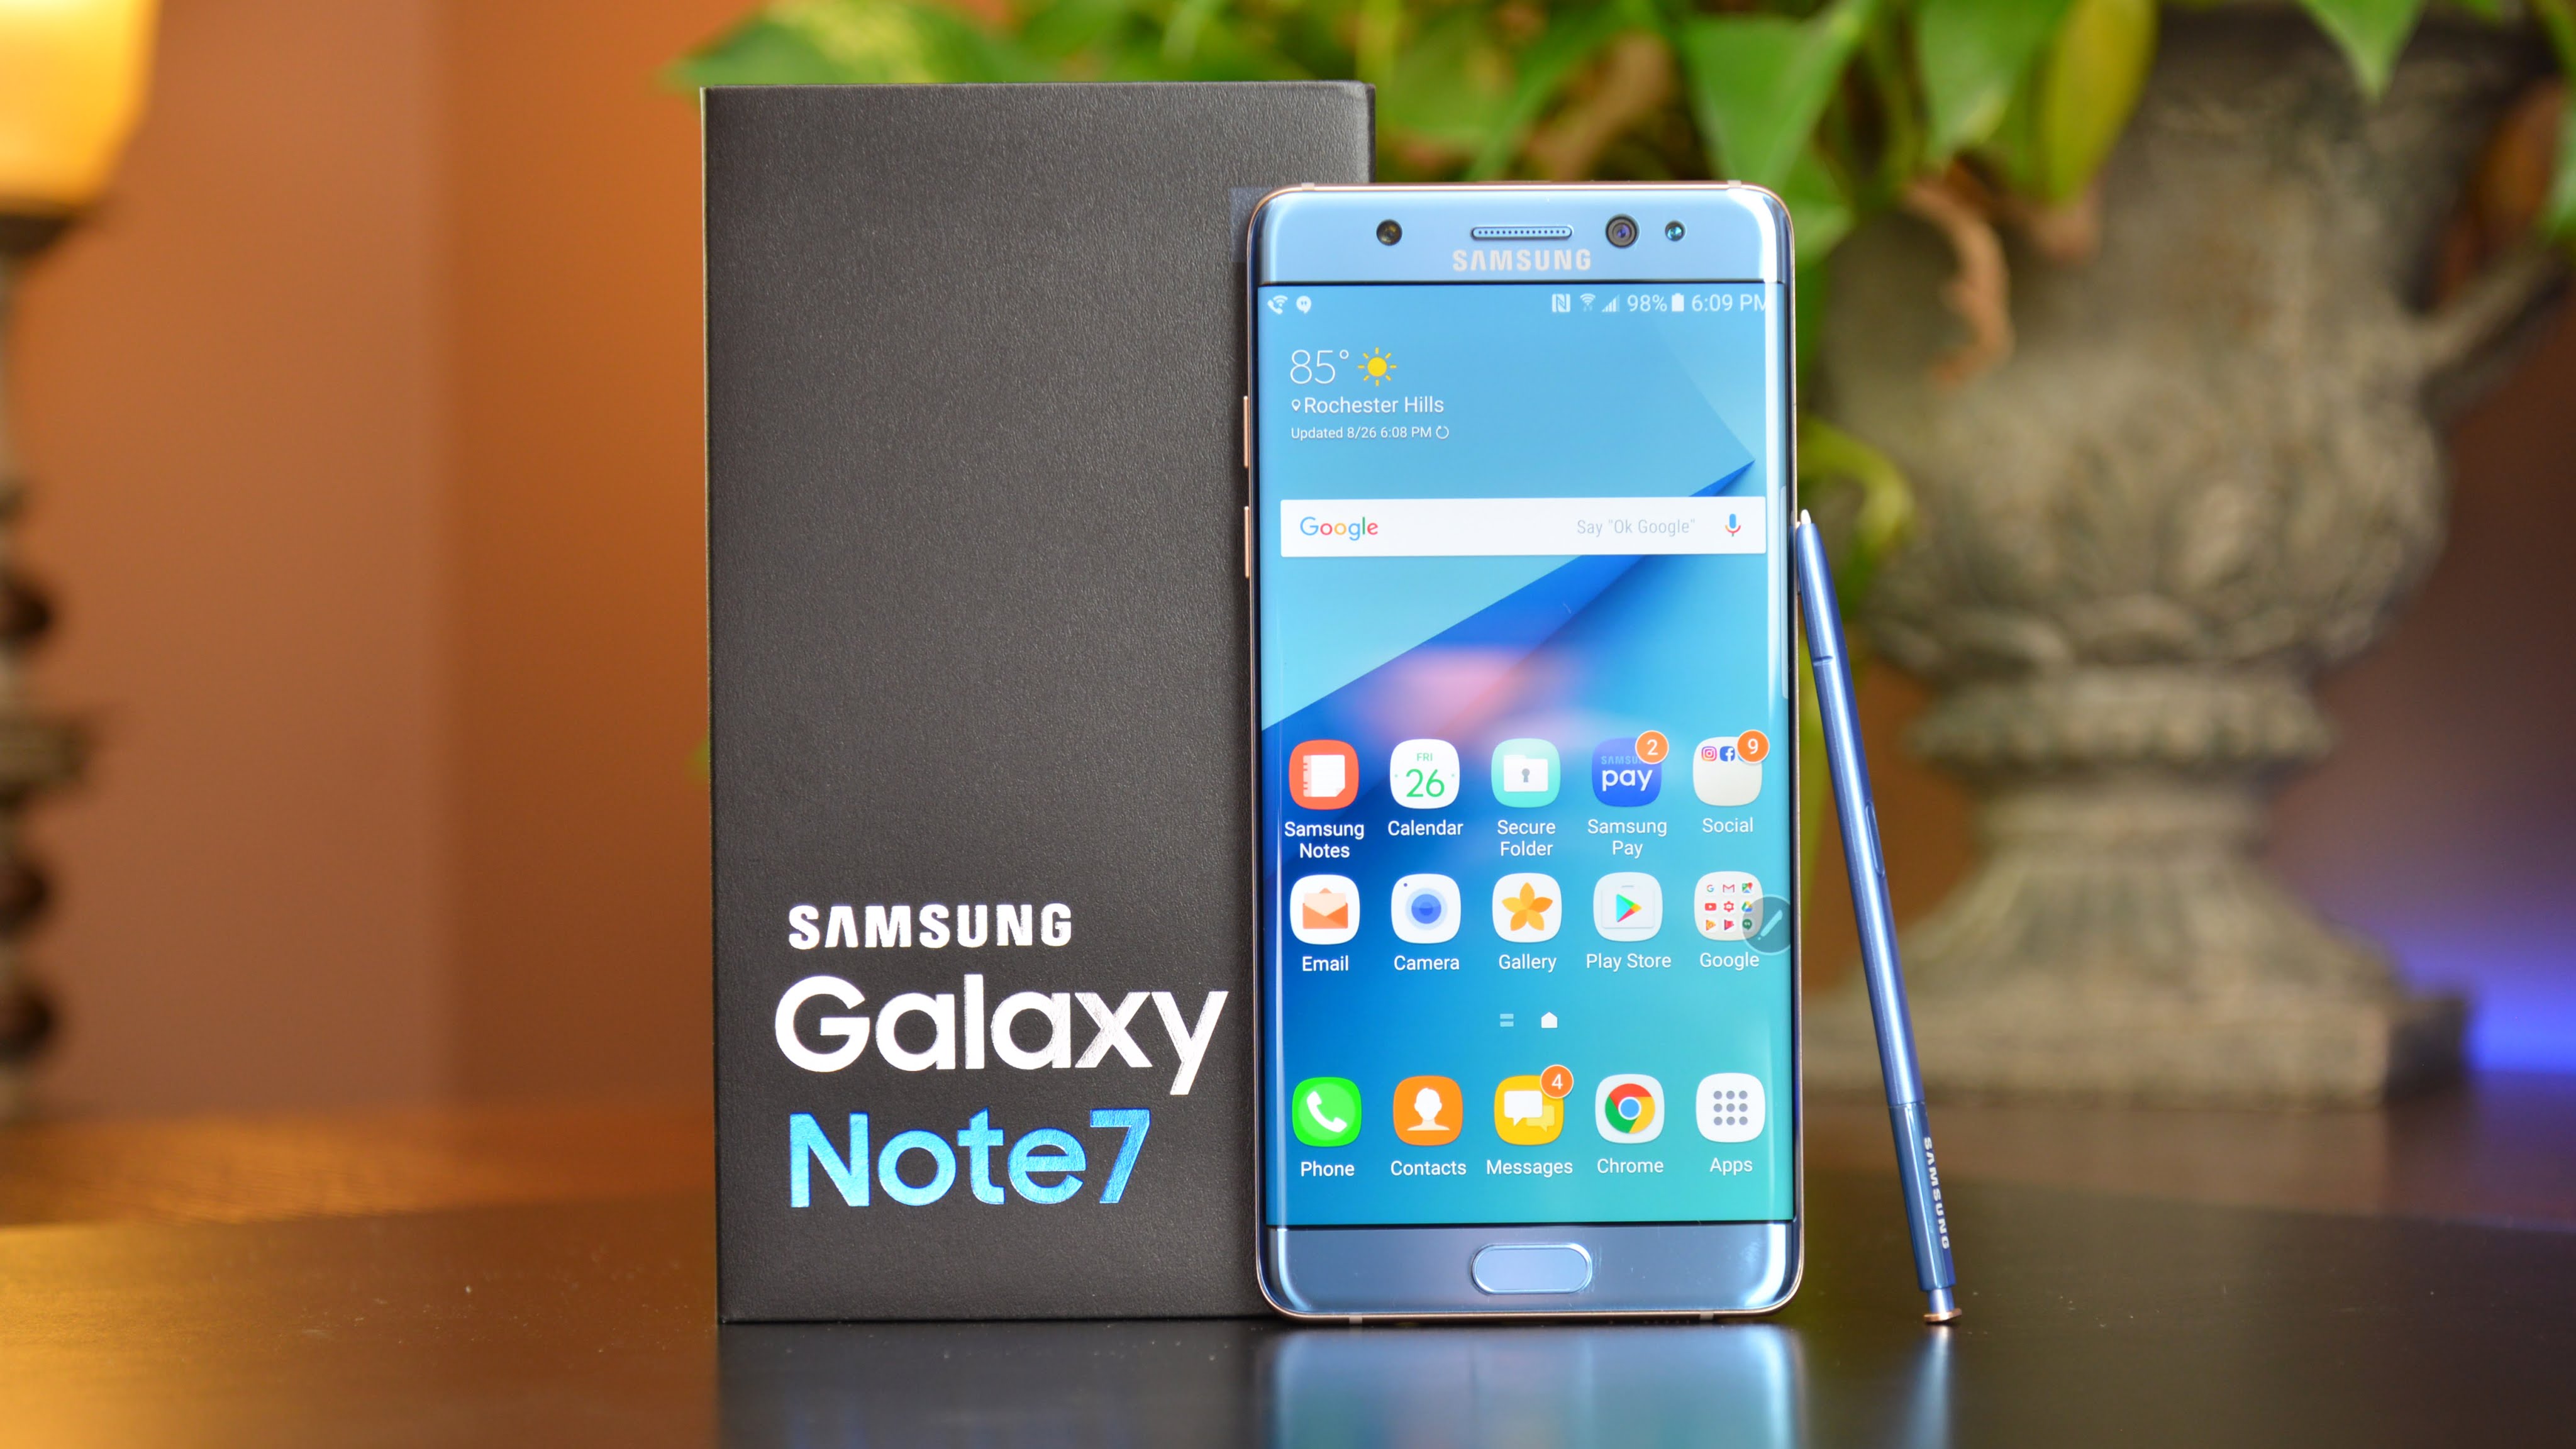 Samsung Galaxy Note 7 vs Xperia Z5: Which smartphone to go for